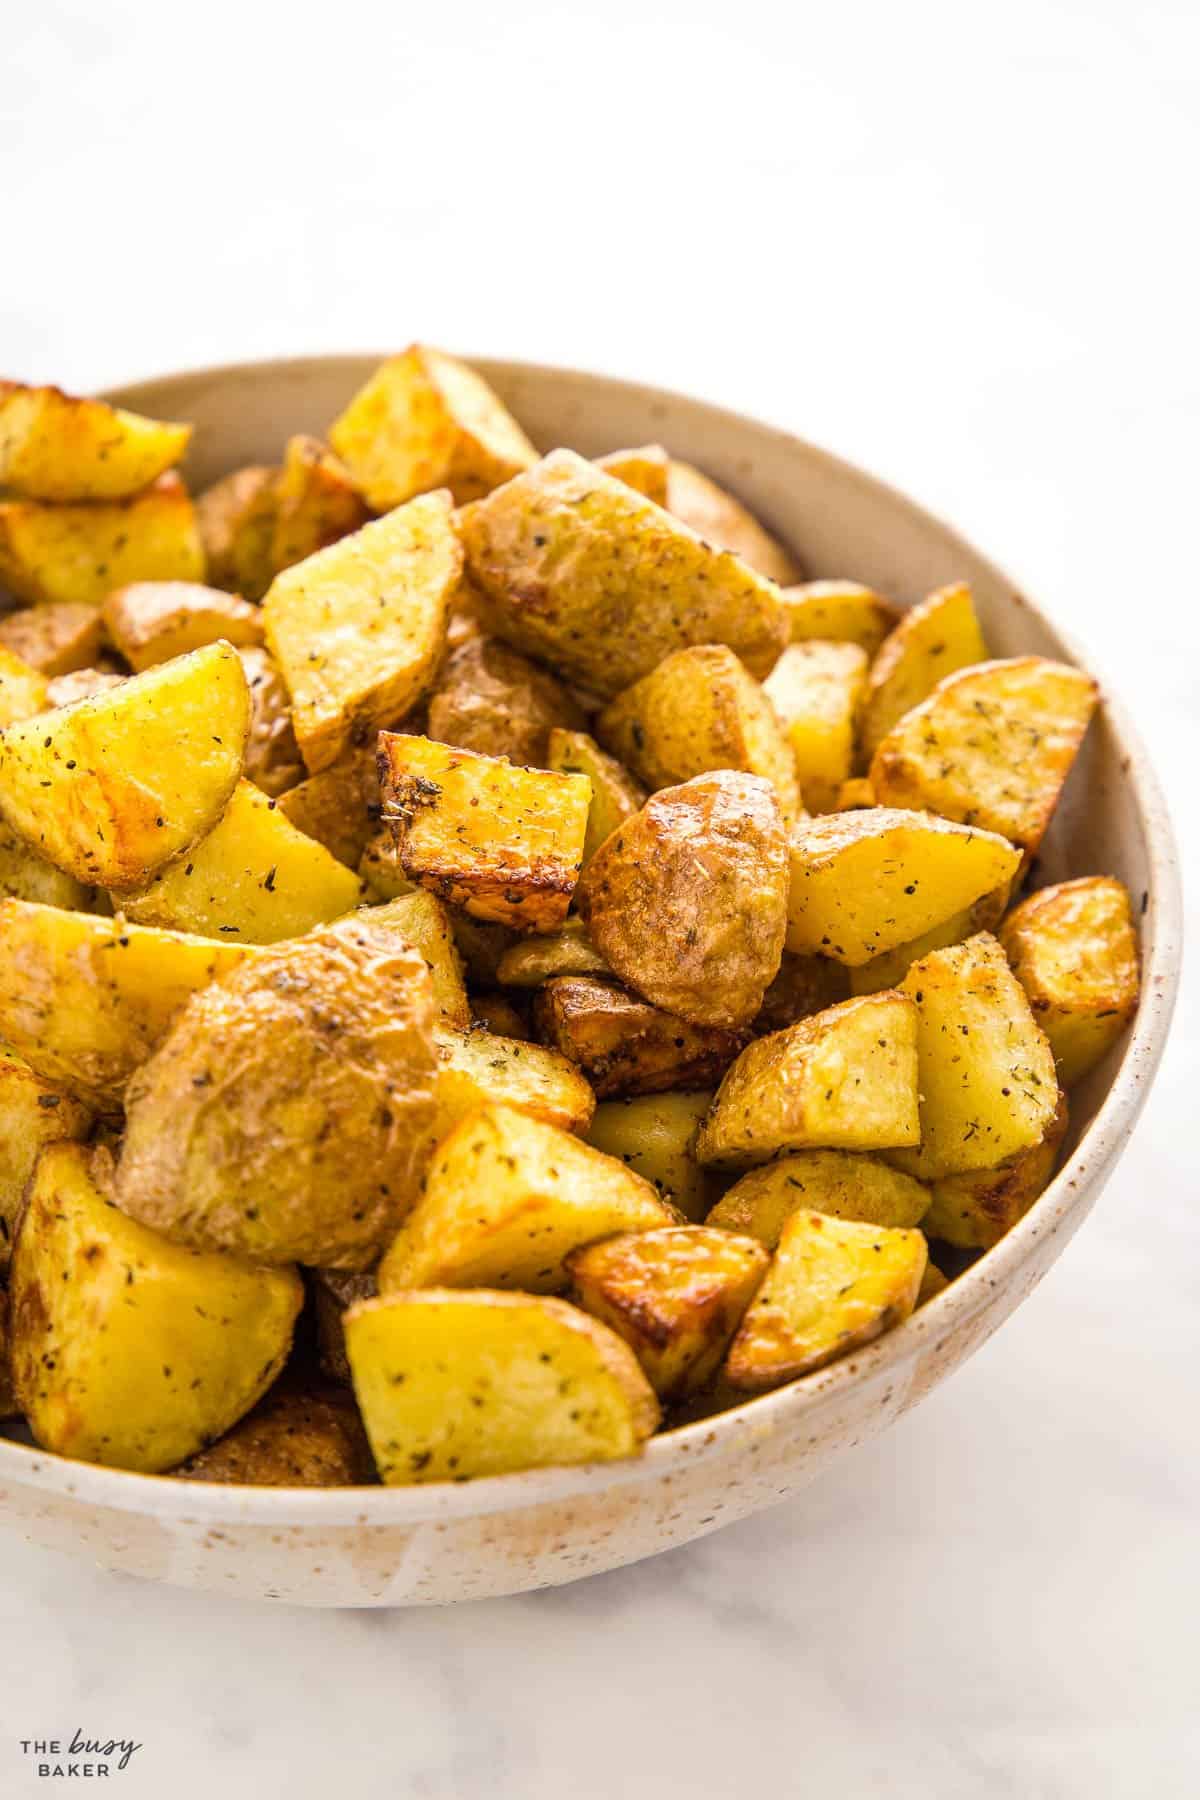 bowl of roasted potatoes with herbs and spices